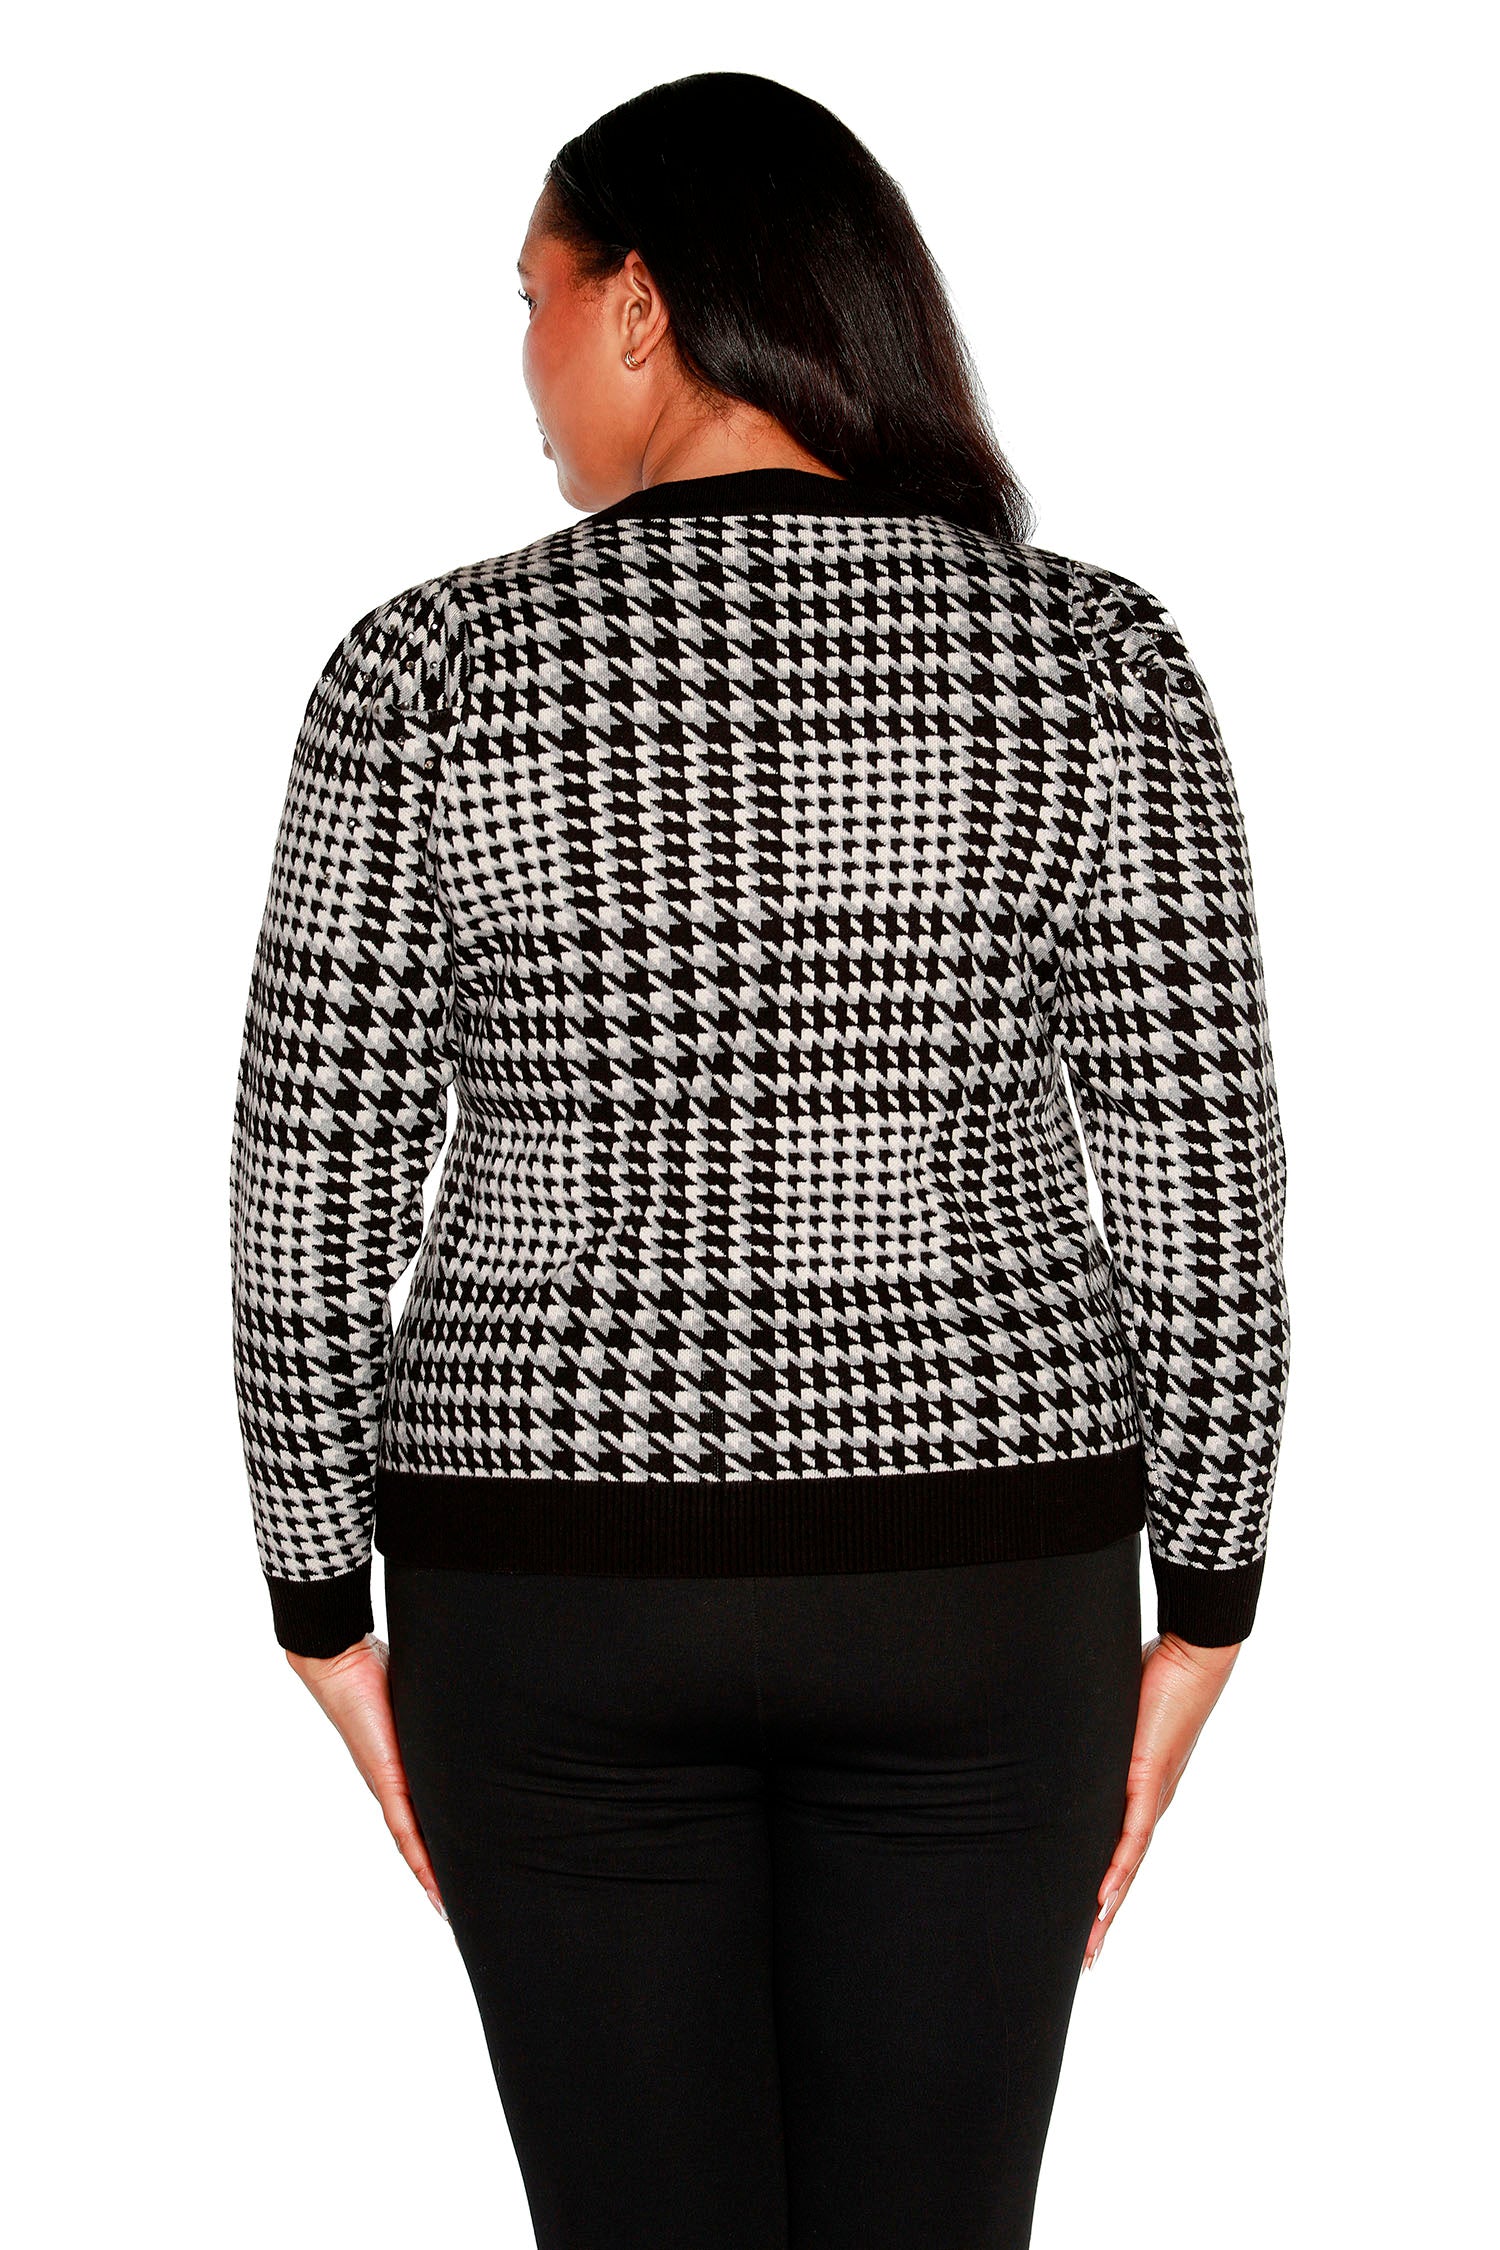 Women's Classic Plaid Sweater with Puff Sleeves, Rhinestones and V-neck | Curvy